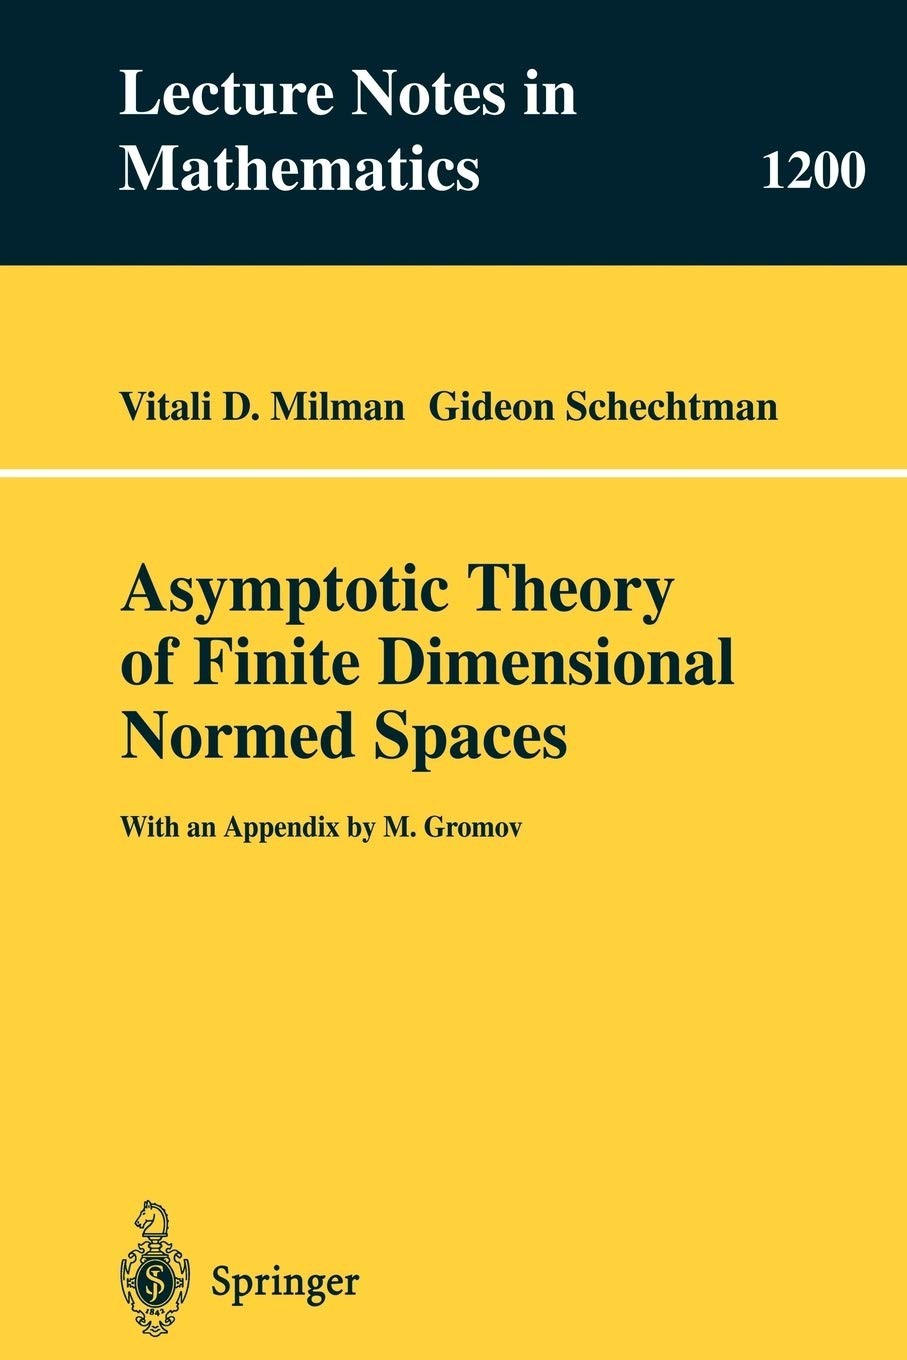 Asymptotic Theory of Finite Dimensional Normed Spaces: Isoperimetric Inequalities in Riemannian Manifolds